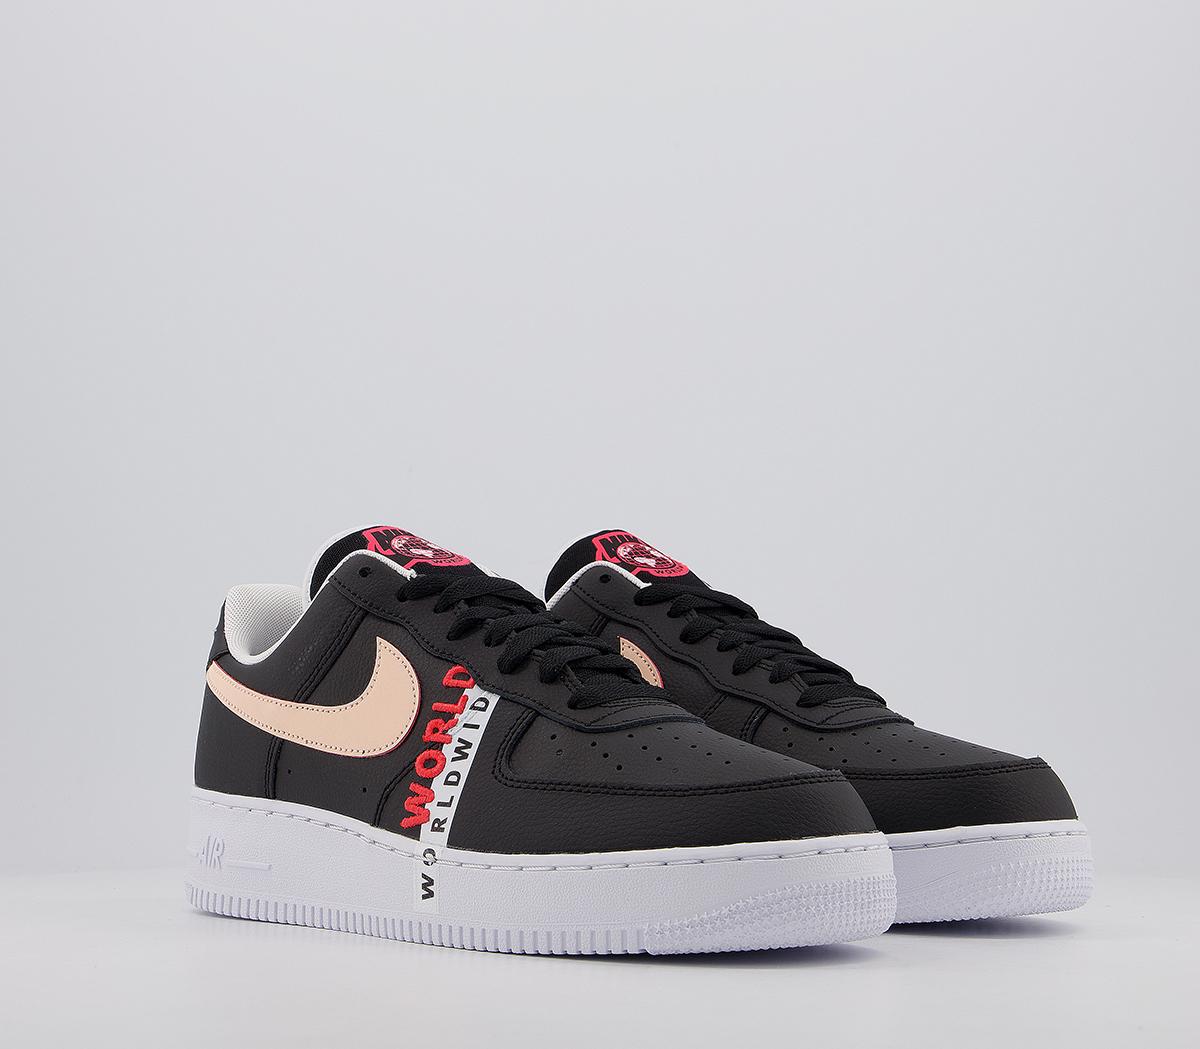 Nike Air Force 1 07 Trainers Black Crimson Tint Ww - His trainers